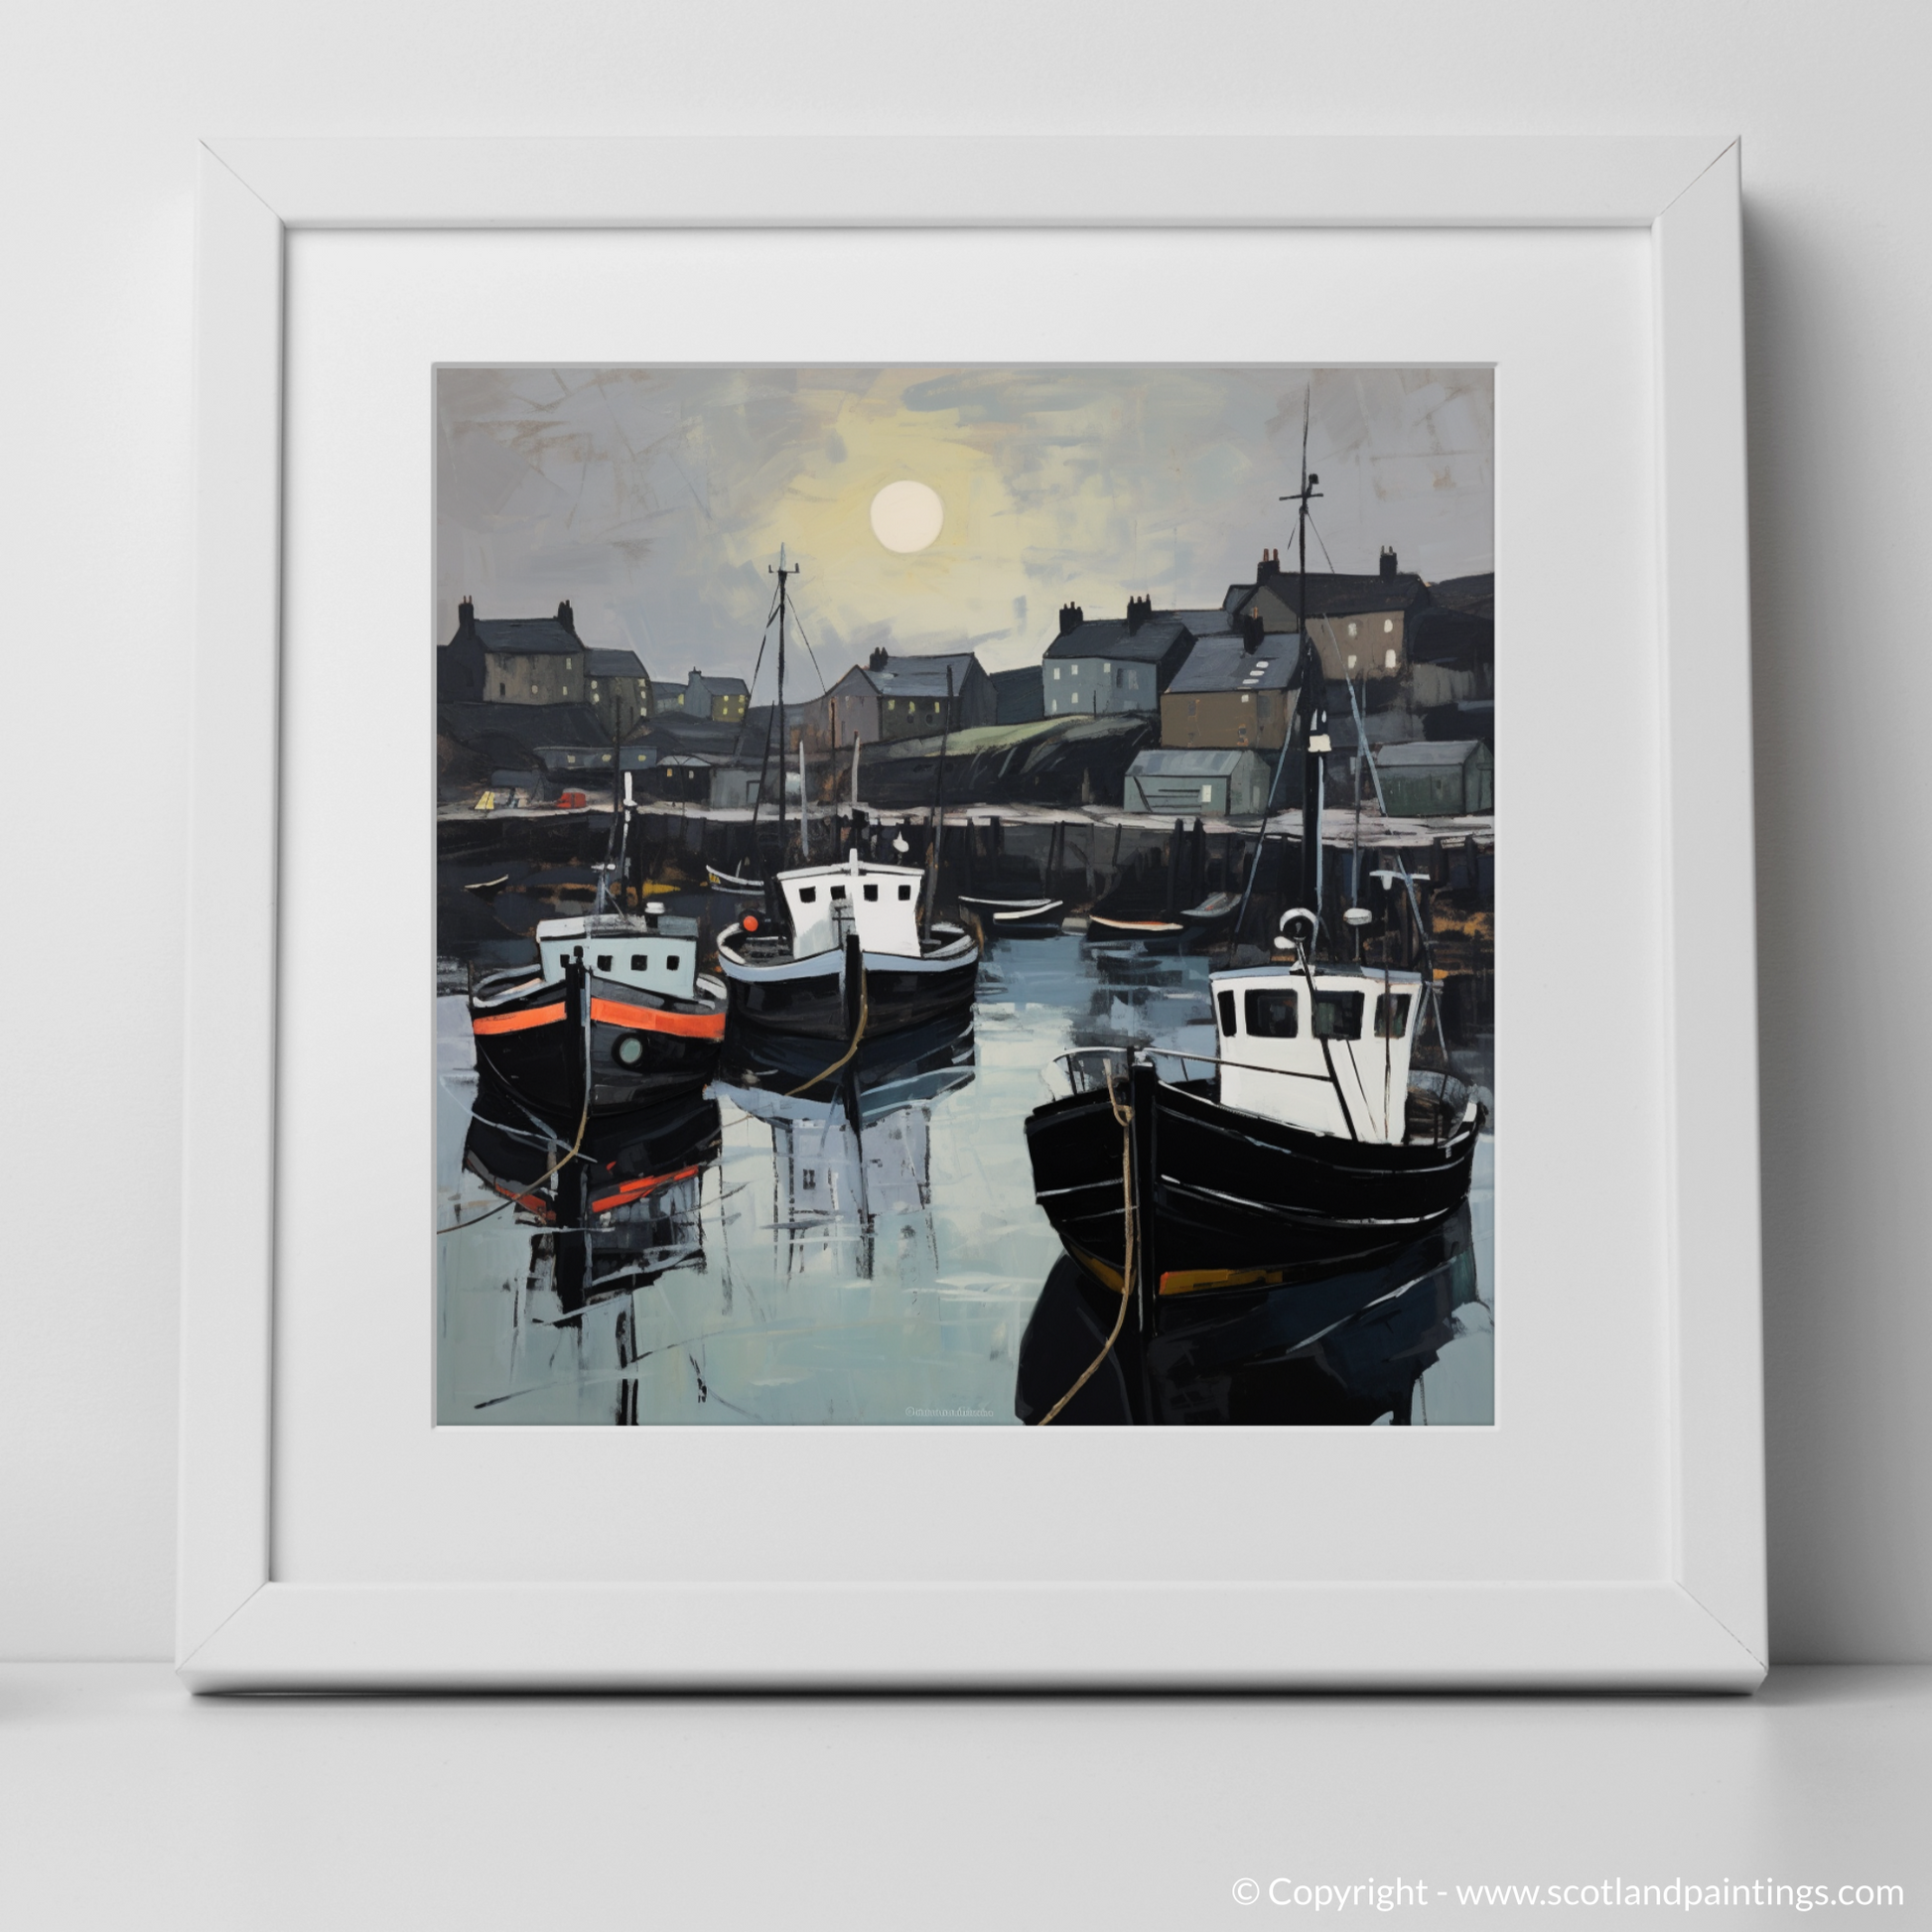 Art Print of Eyemouth Harbour with a white frame